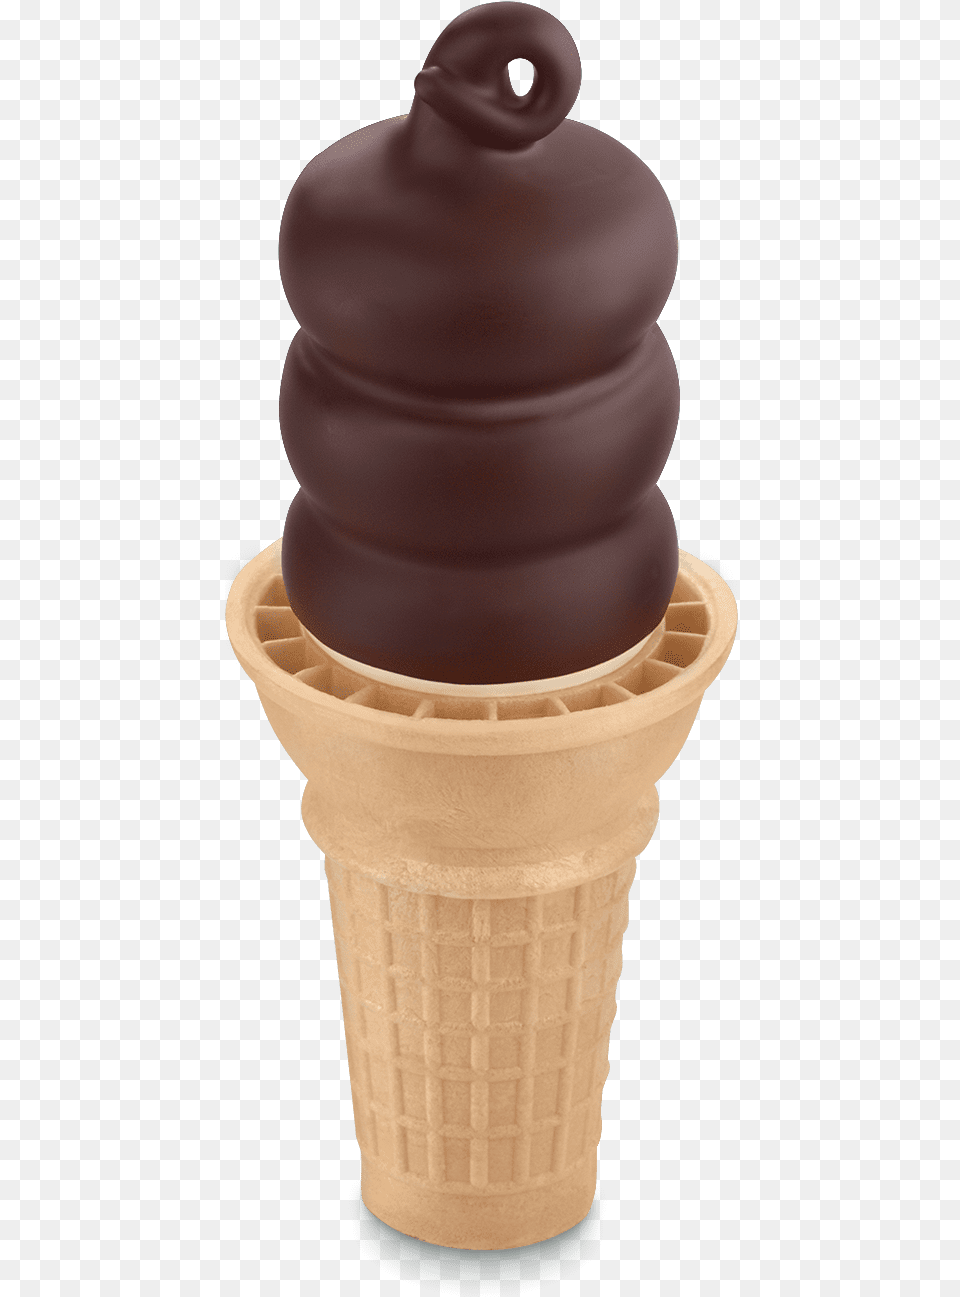 Chocolate Dipped Cone Dairy Queen Menu Solid, Cream, Dessert, Food, Ice Cream Free Png